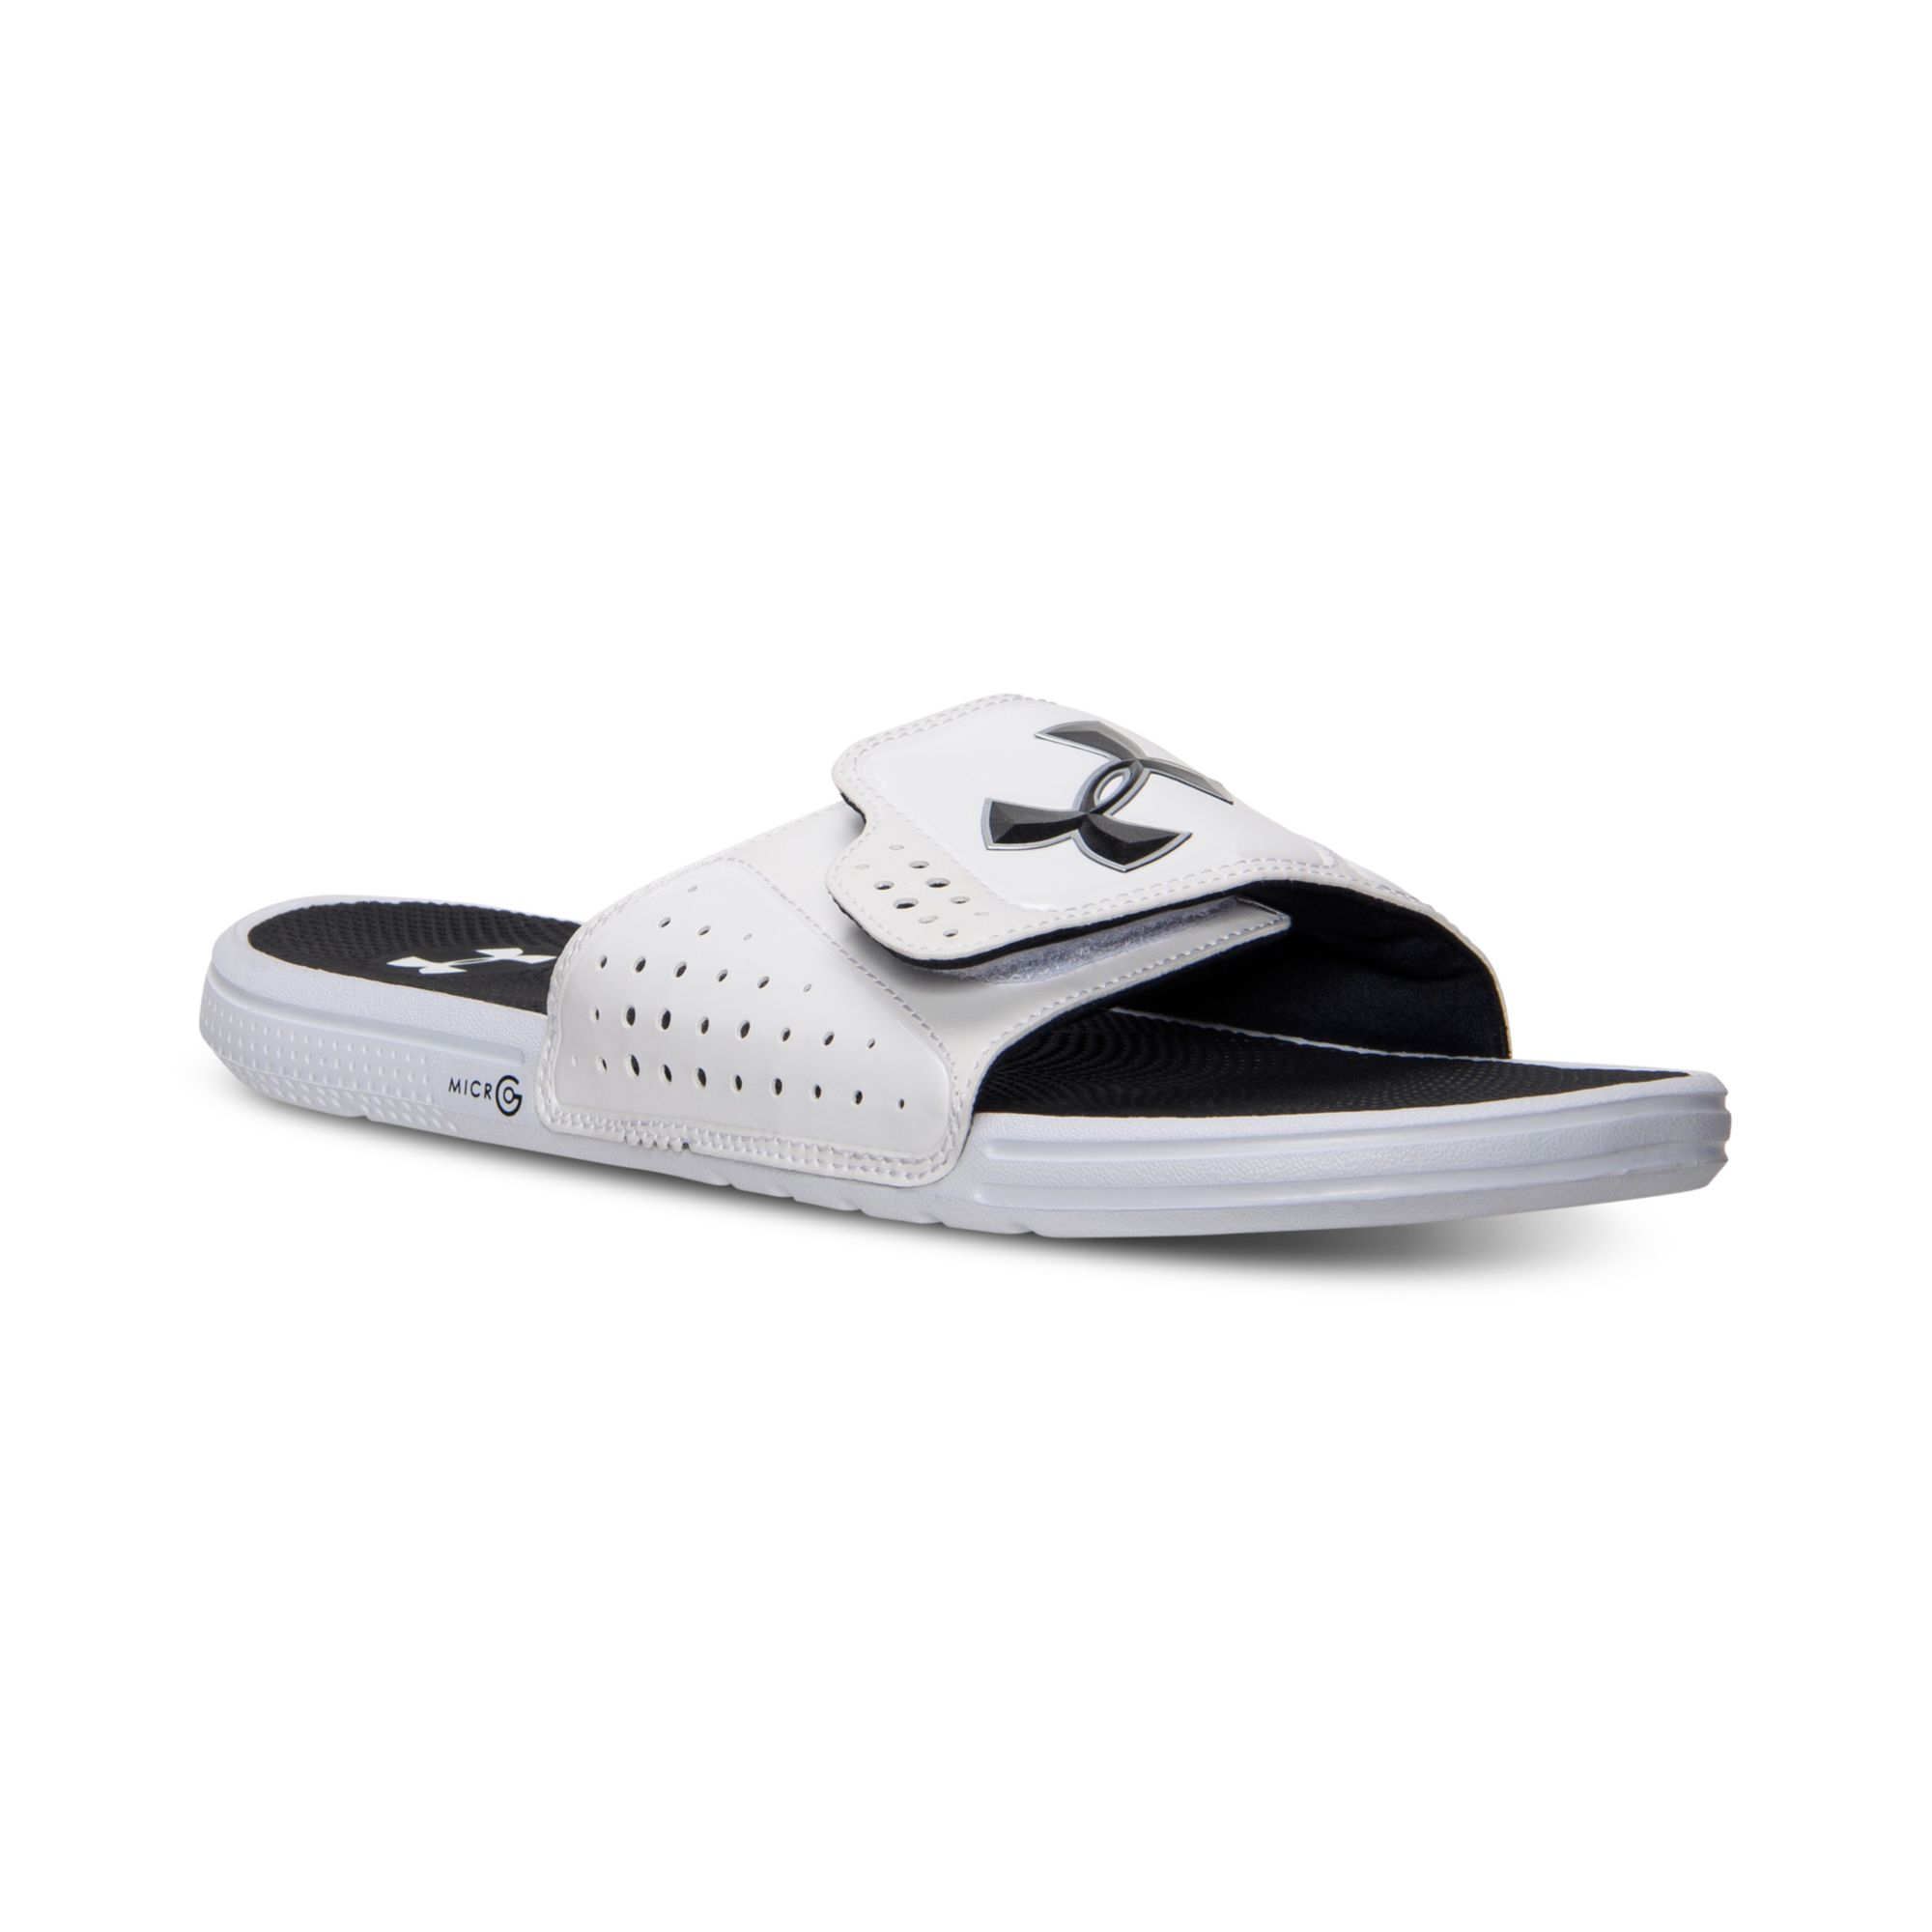 Under Armour Mens Micro G Ev Slide Sandals From Finish Line in White for  Men | Lyst